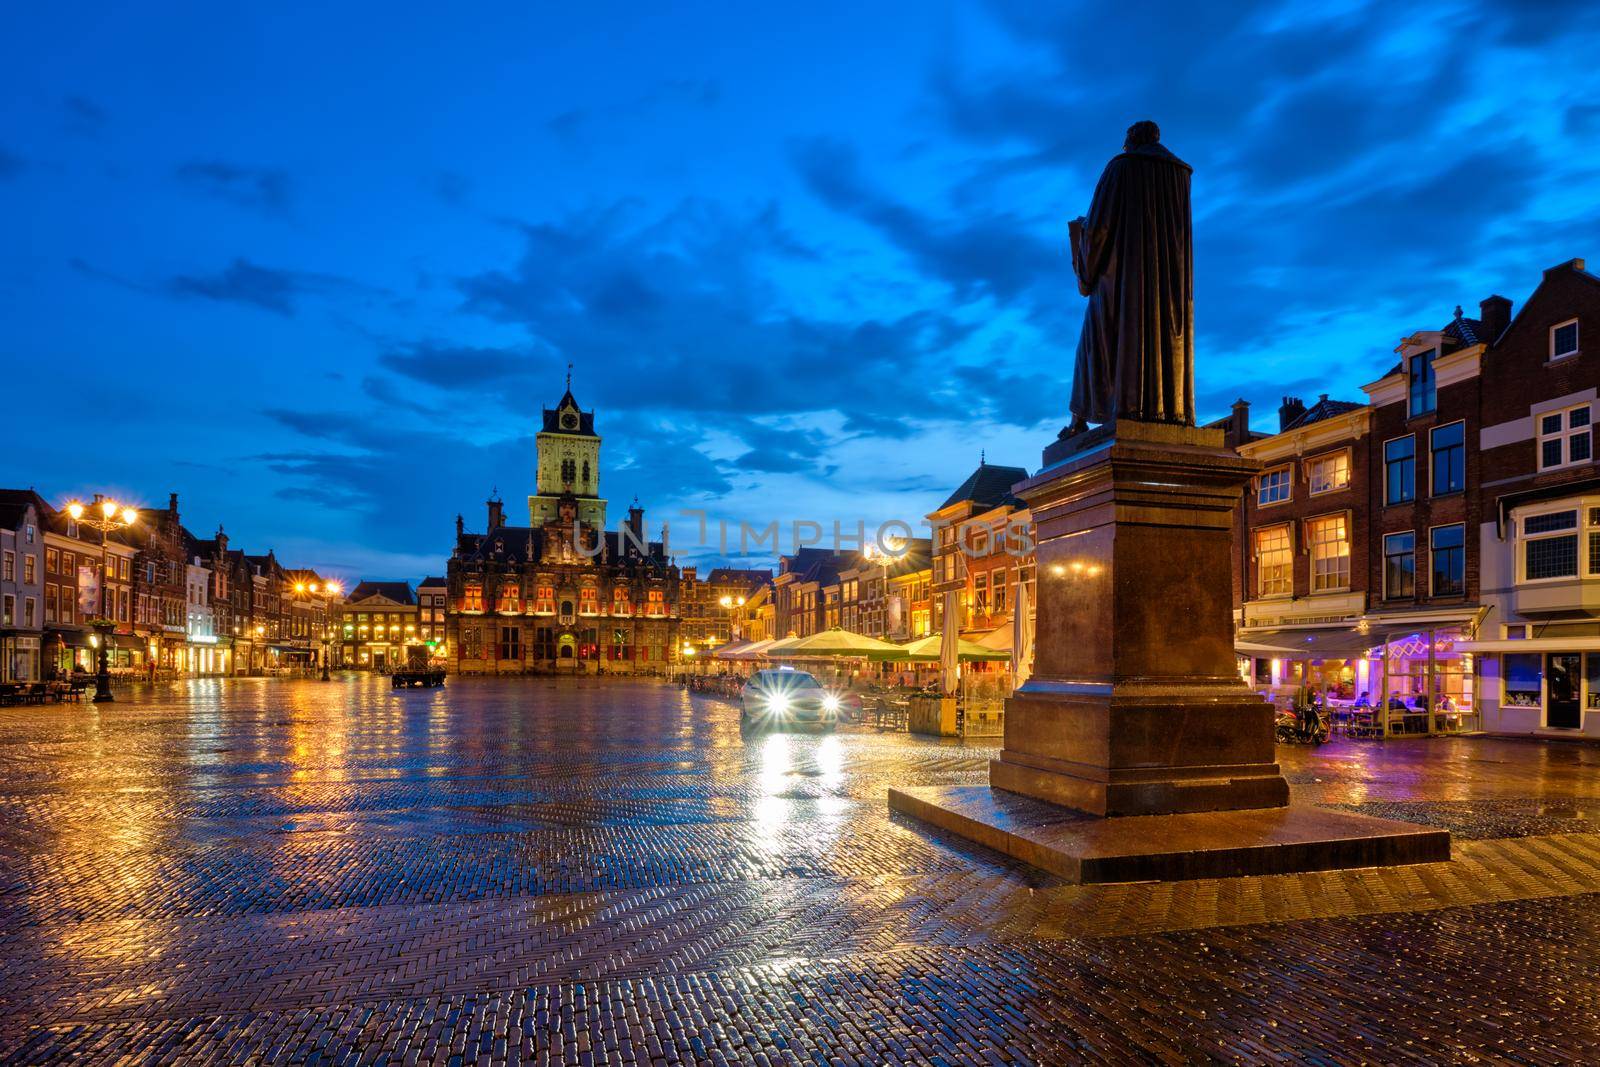 Delft City Hall and Delft Market Square Markt with Hugo de Groot Monument in the evening. Delfth, Netherlands